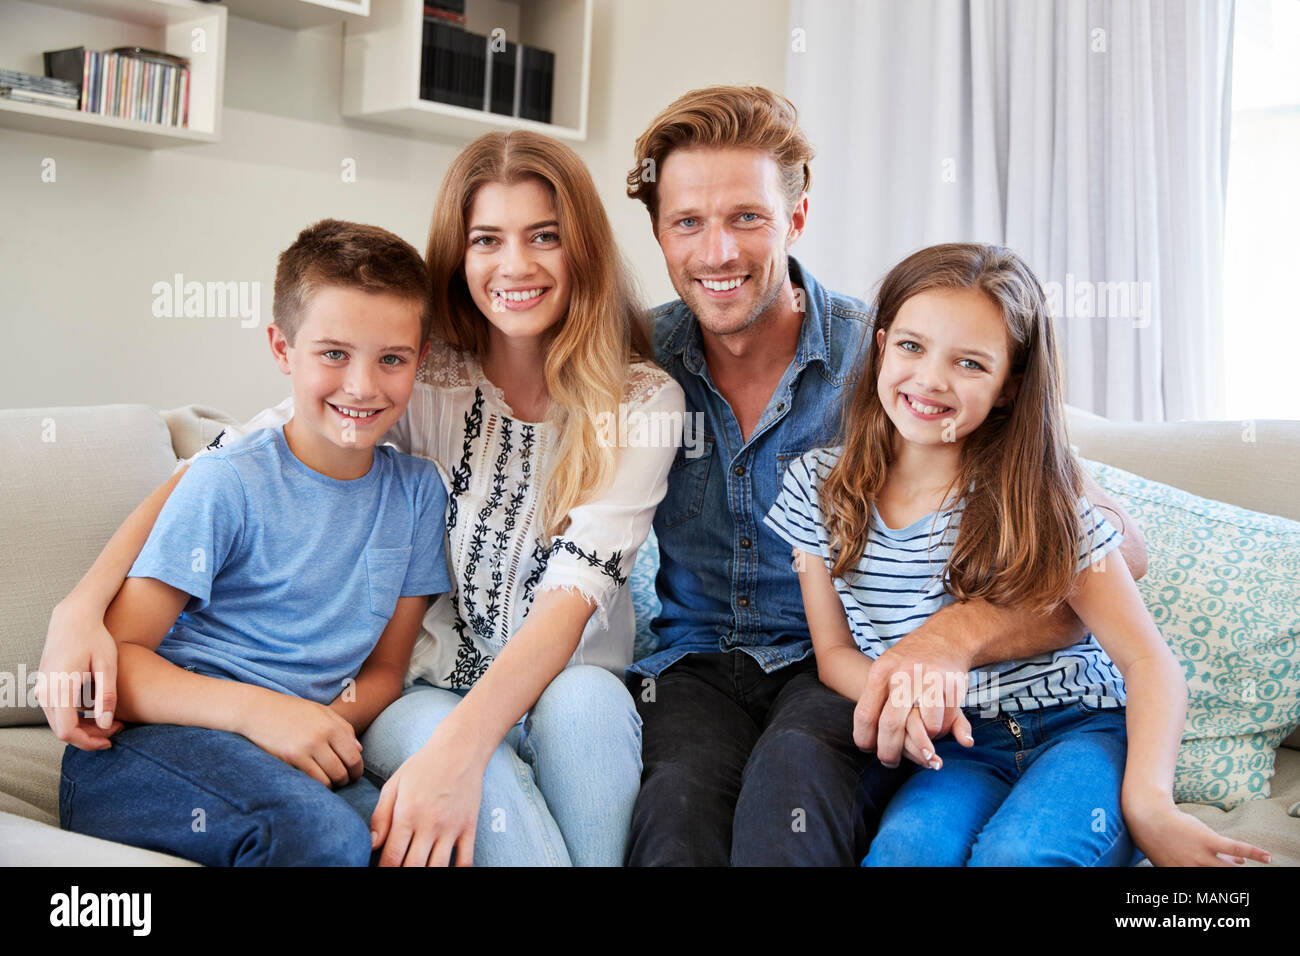 Portrait Of Smiling Family Sitting on Sofa At Home Together Banque D'Images